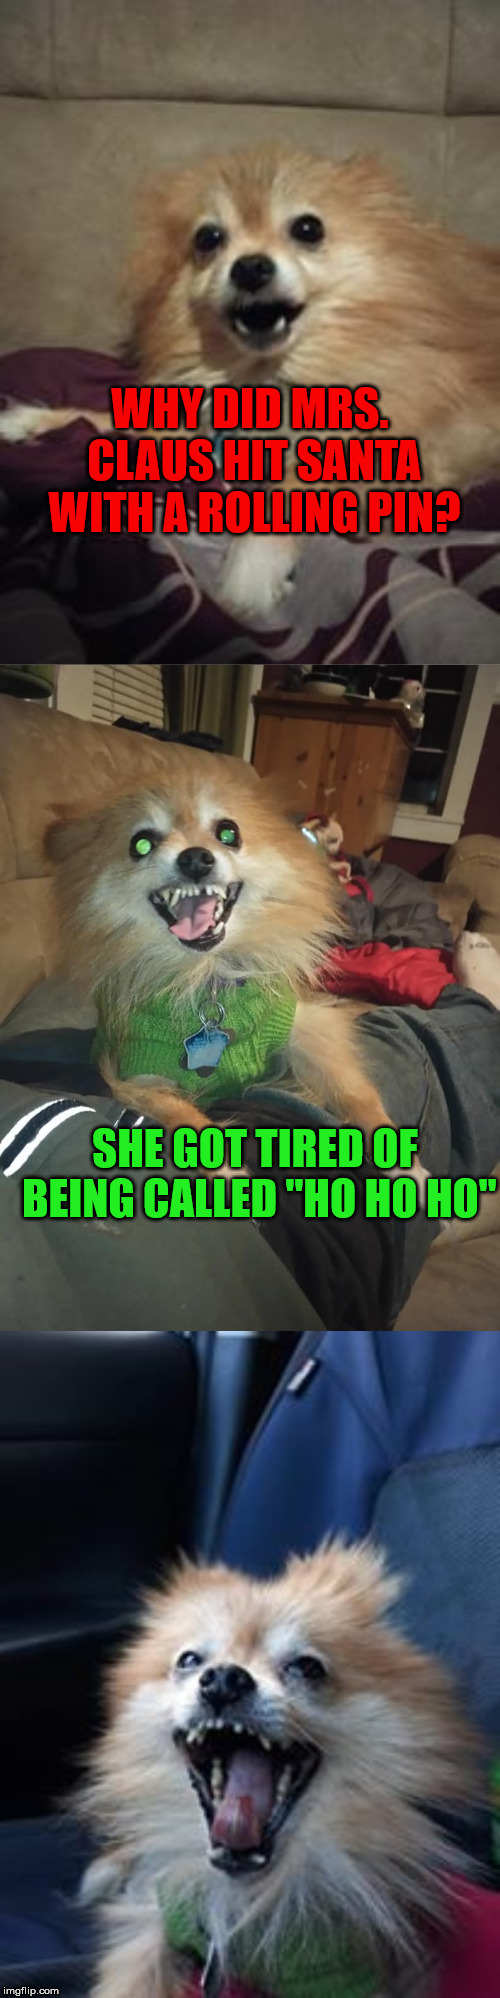 Bad Pun Mocha | WHY DID MRS. CLAUS HIT SANTA WITH A ROLLING PIN? SHE GOT TIRED OF BEING CALLED "HO HO HO" | image tagged in bad pun mocha | made w/ Imgflip meme maker